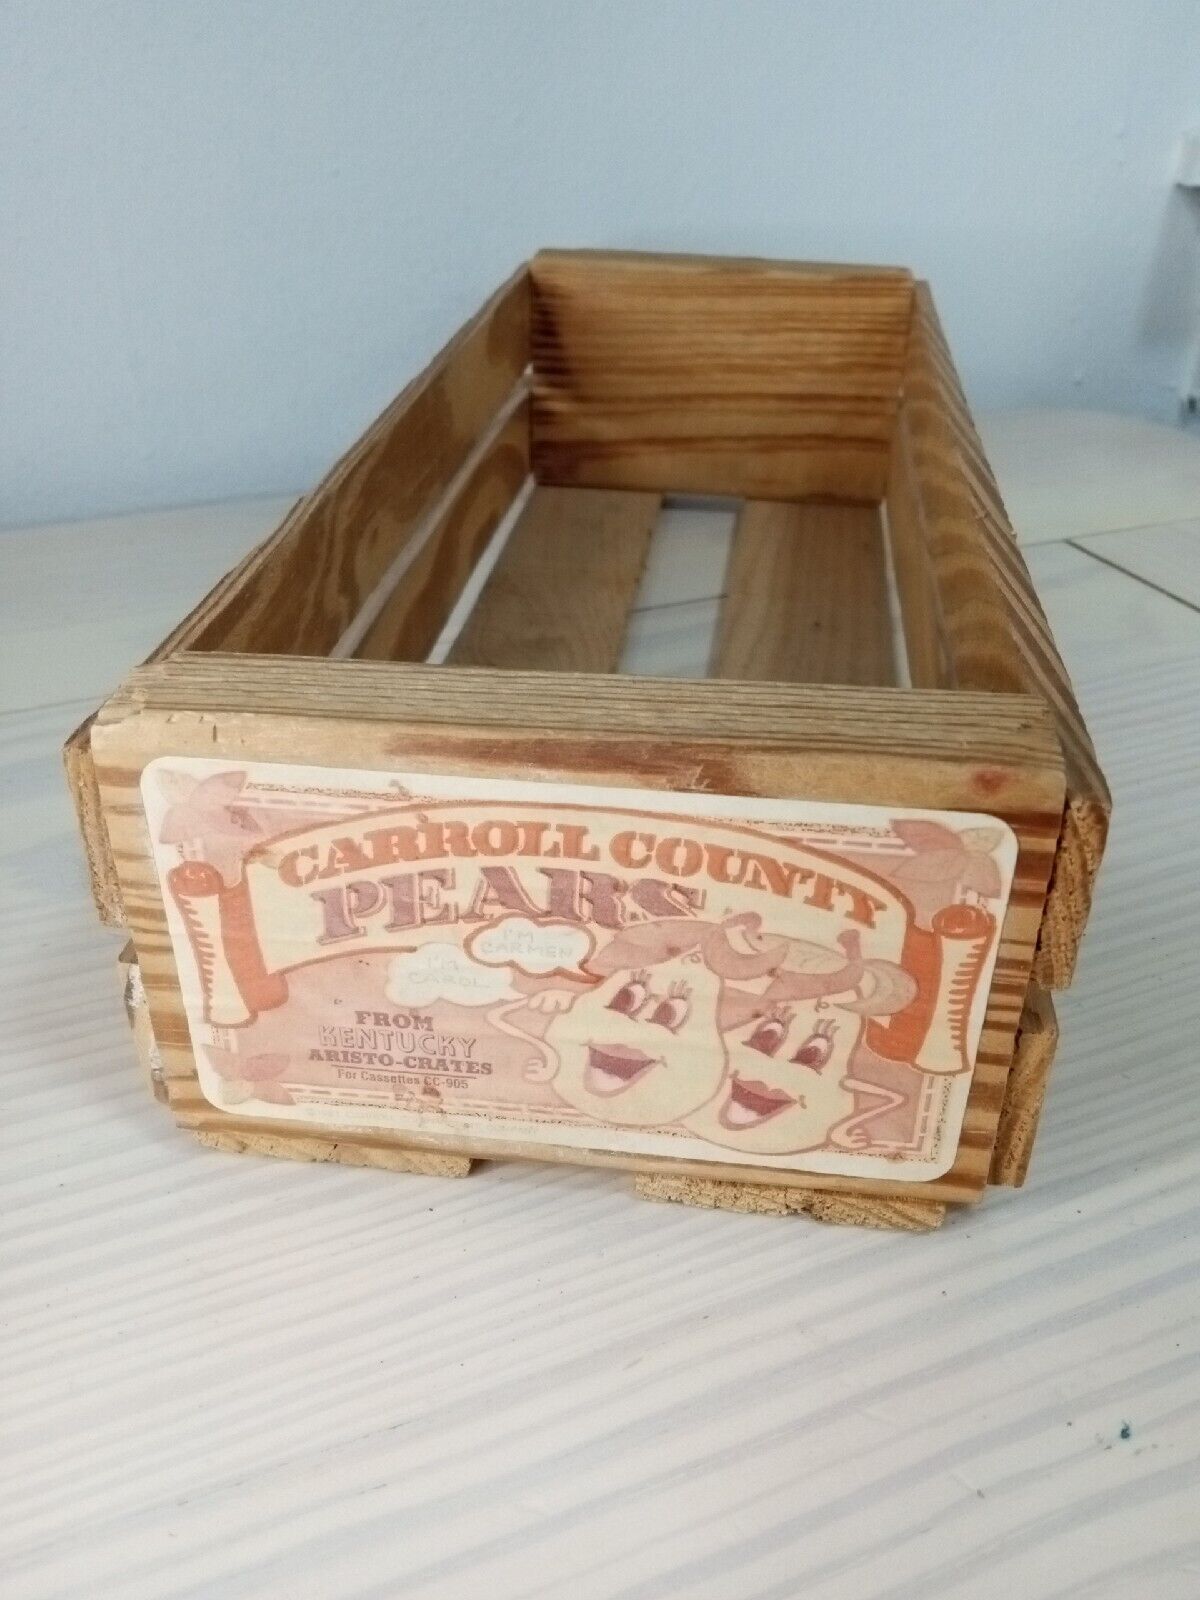 Vintage Wood CASSETTE Crate Carroll County Co Pears Kentucky Aristo-Crates 1983